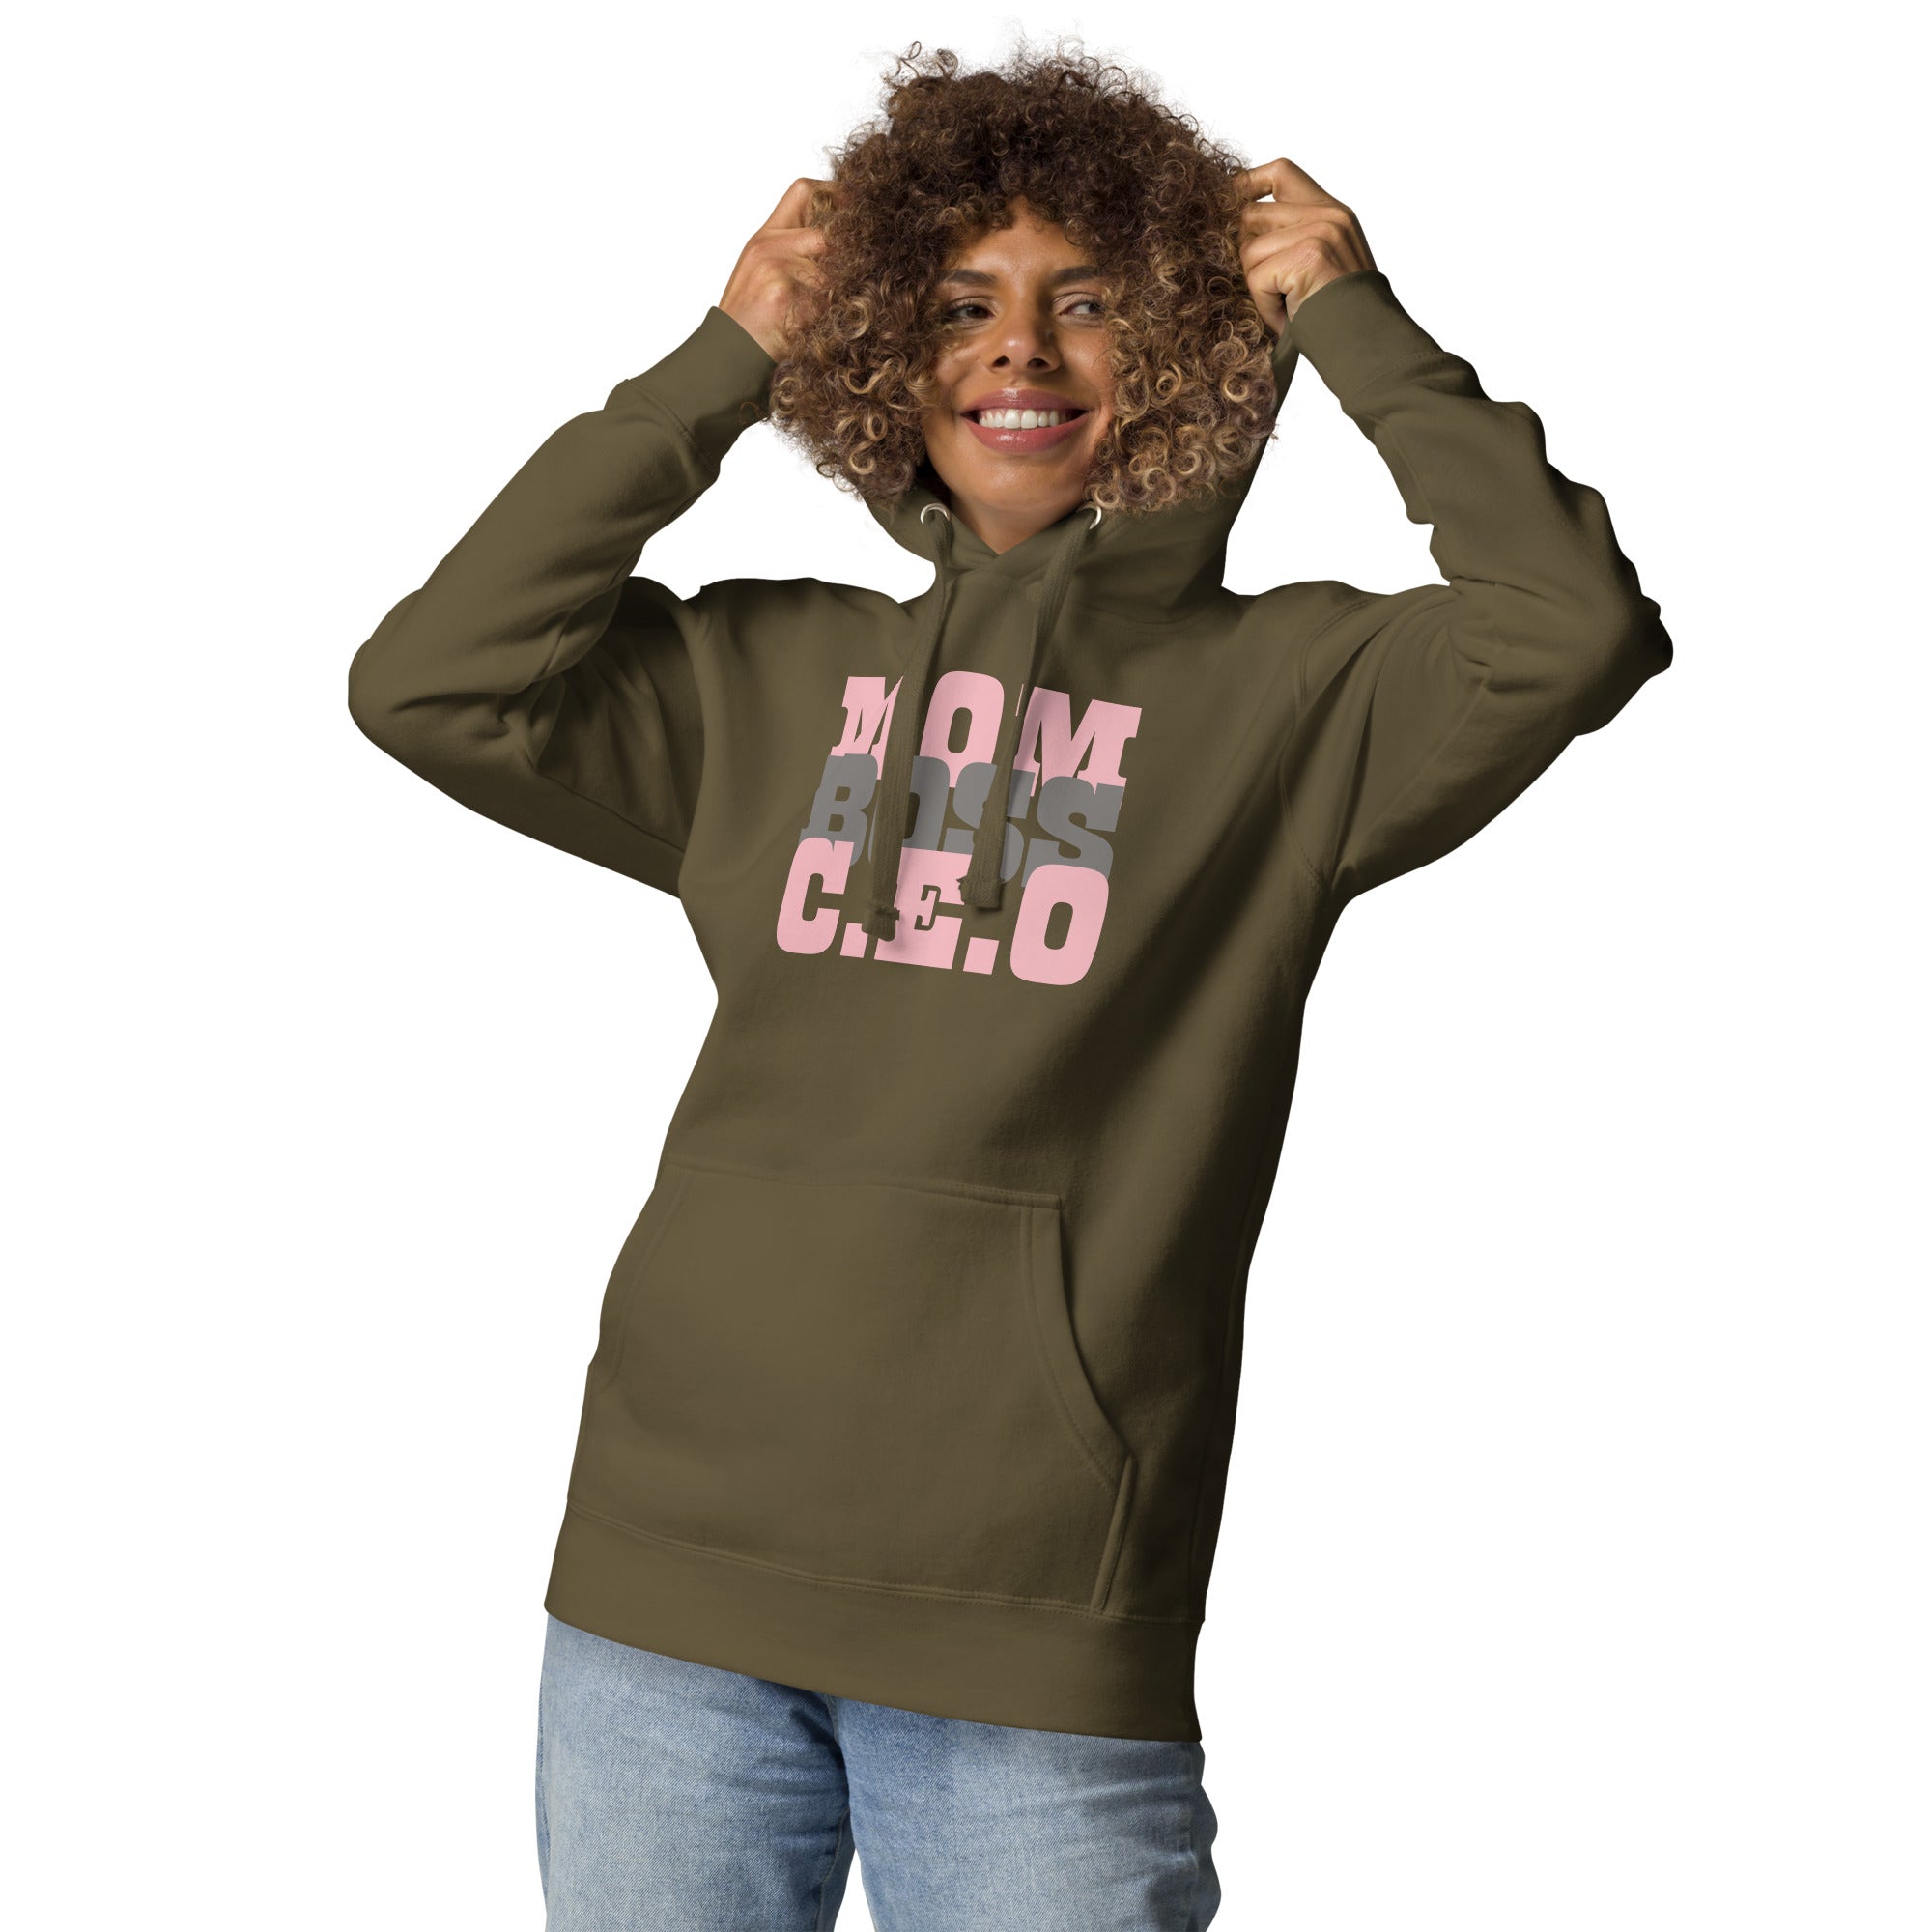 Shop Mom Boss C.E.O Graphic Hoodie | Mother's Day Gift Ideas, Hoodies, USA Boutique